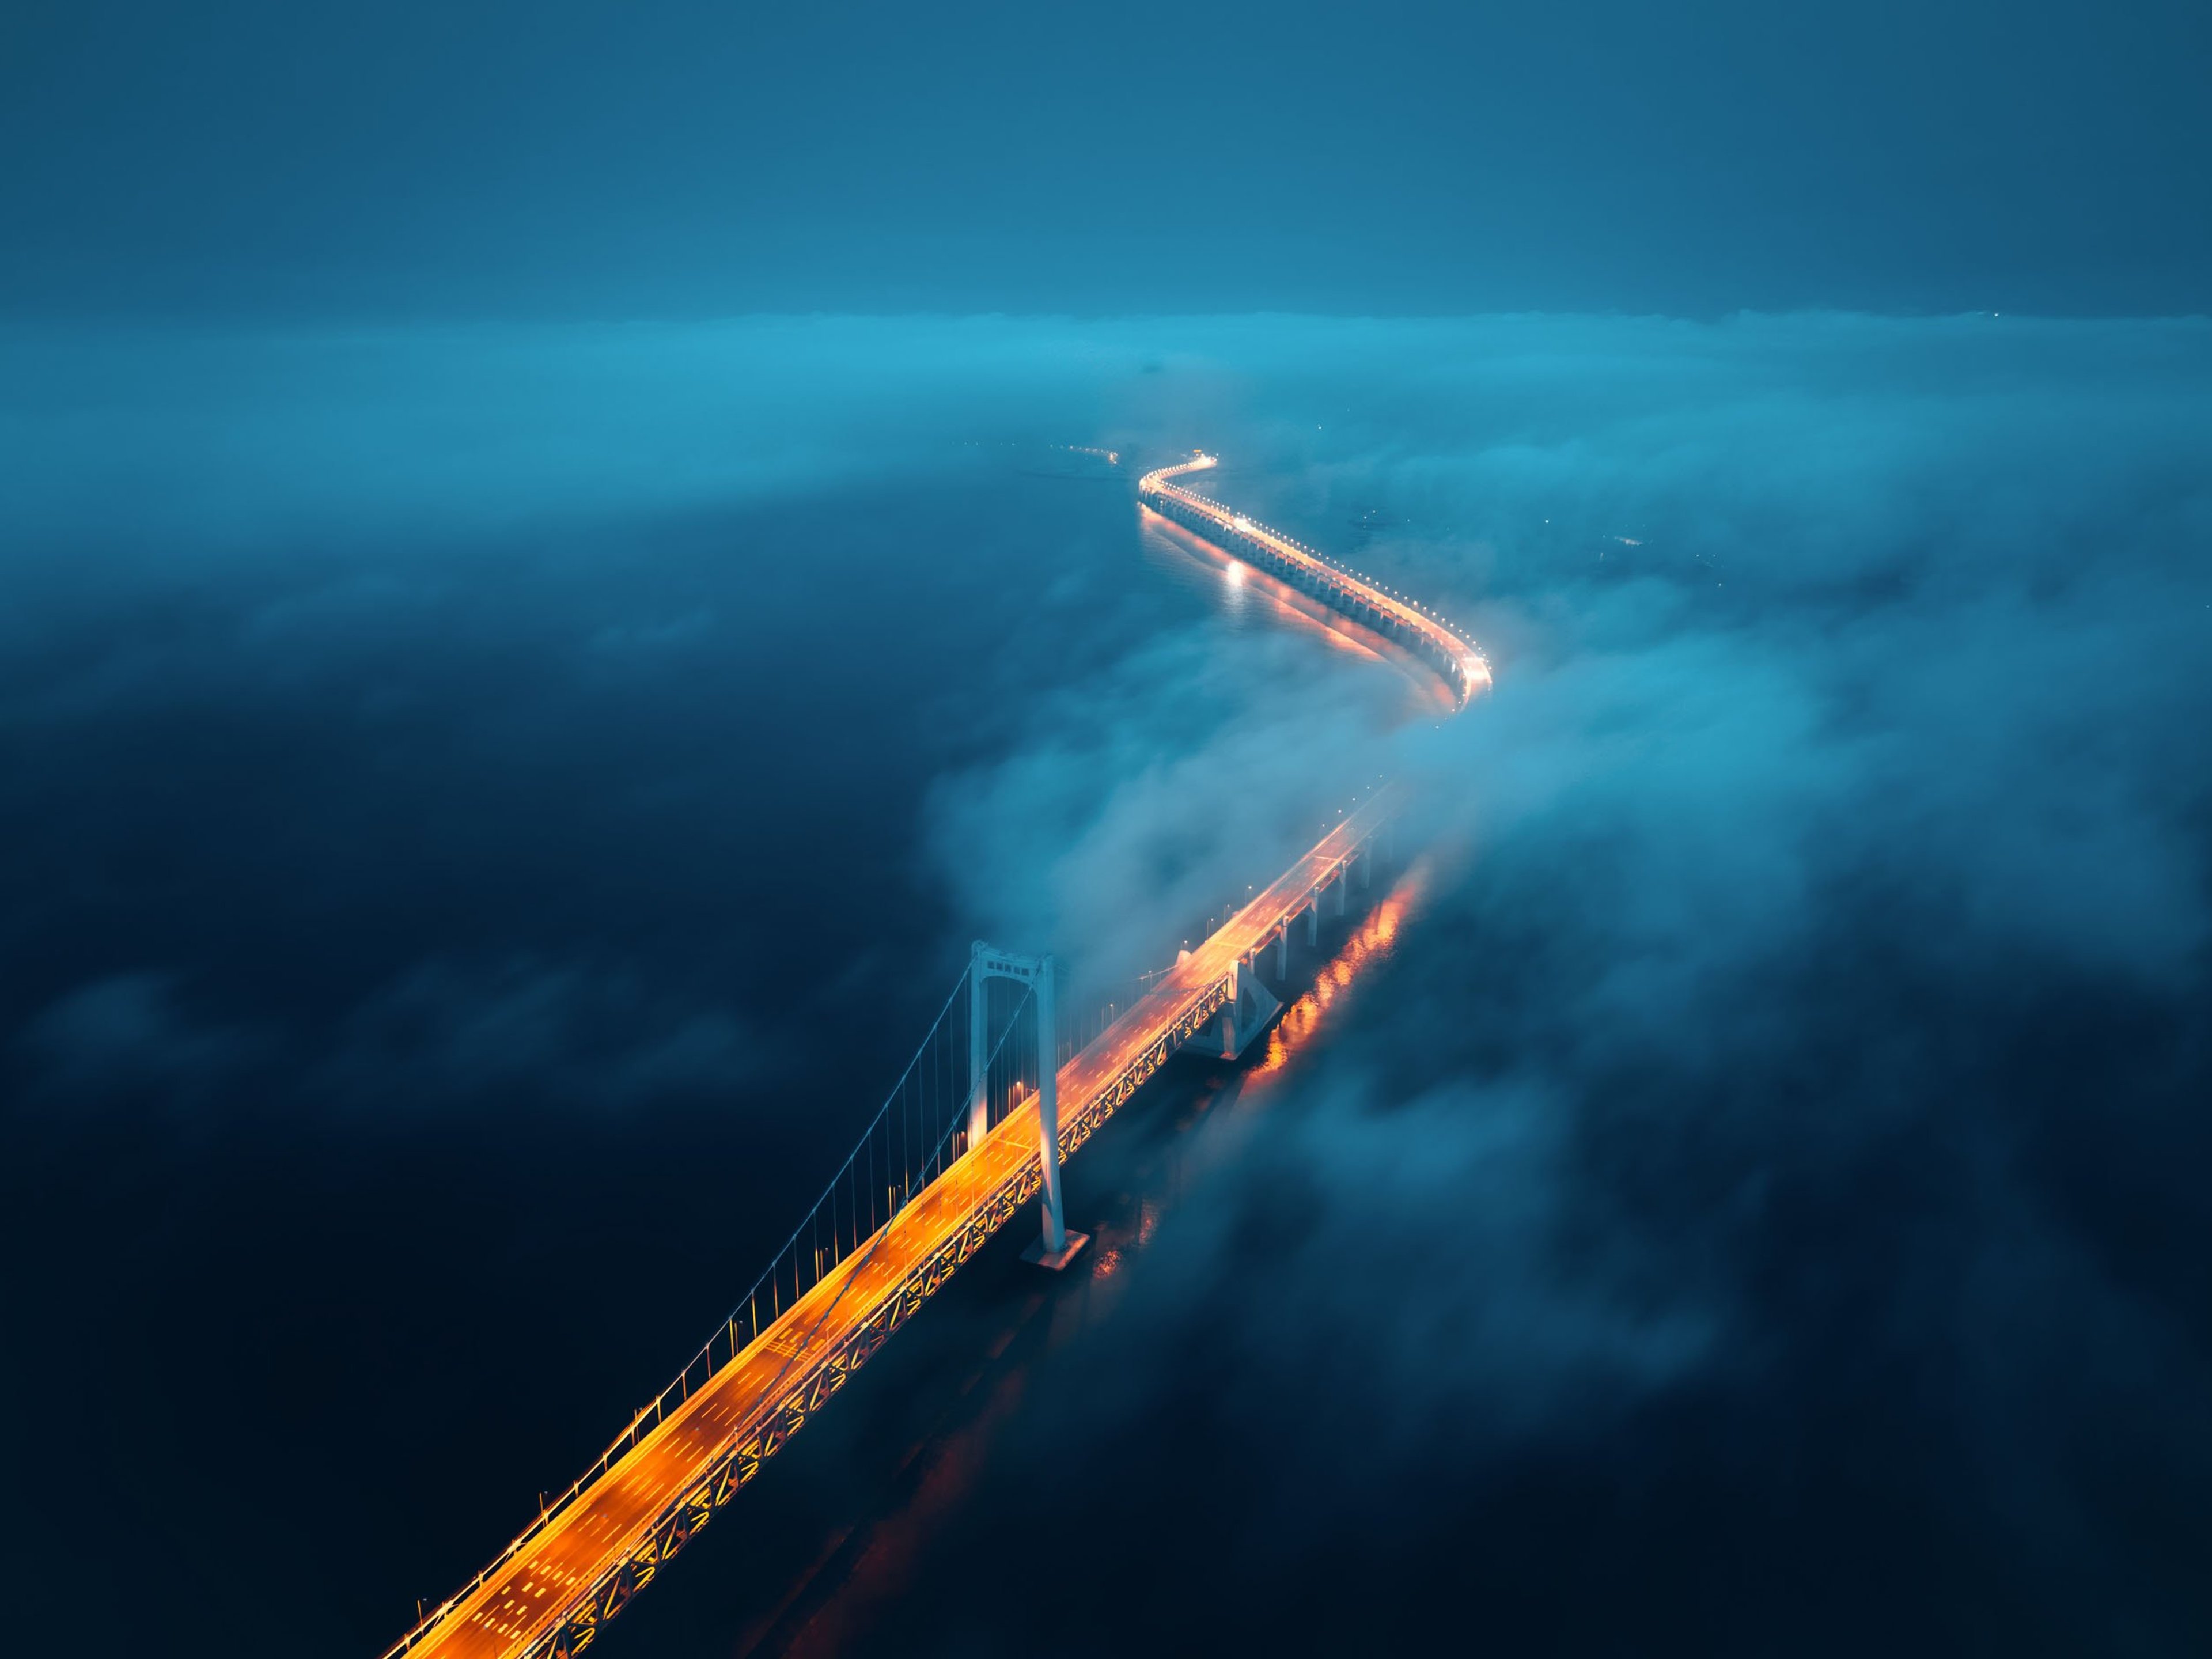 A cross-sea bridge in the fog at night in liaoning, China.